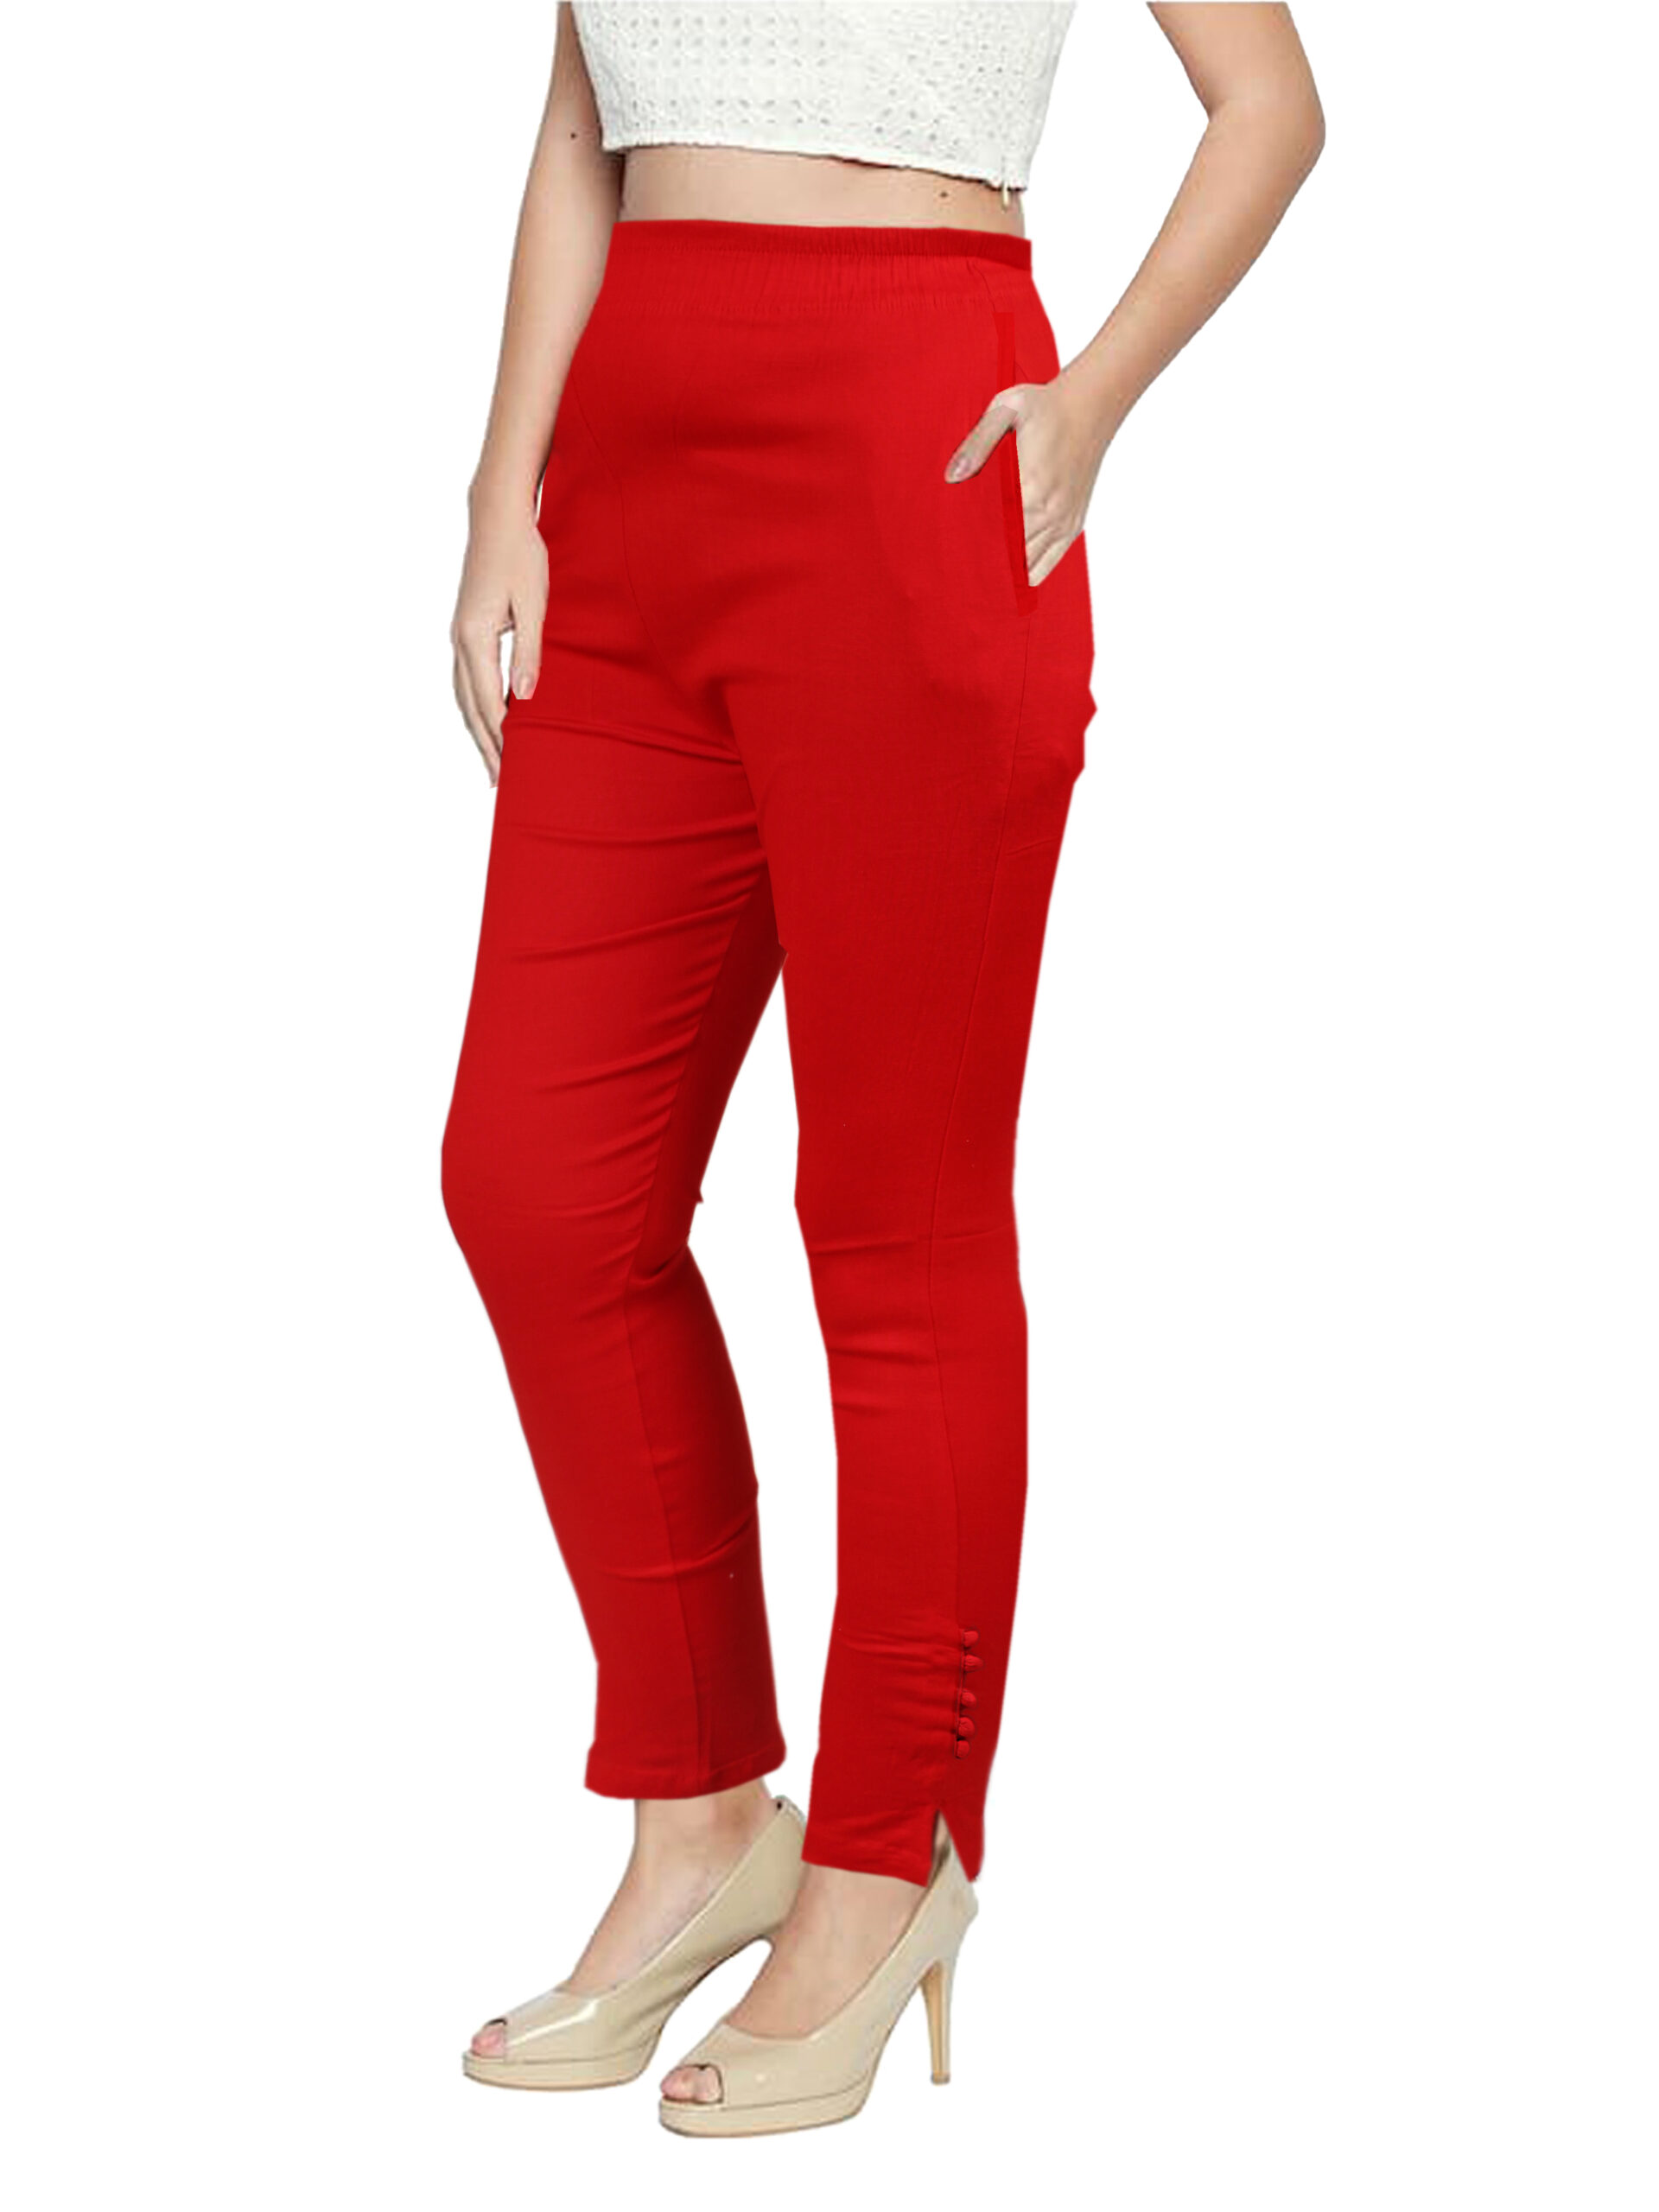 Buy Stylish Red Cigarette Pants Collection At Best Prices Online